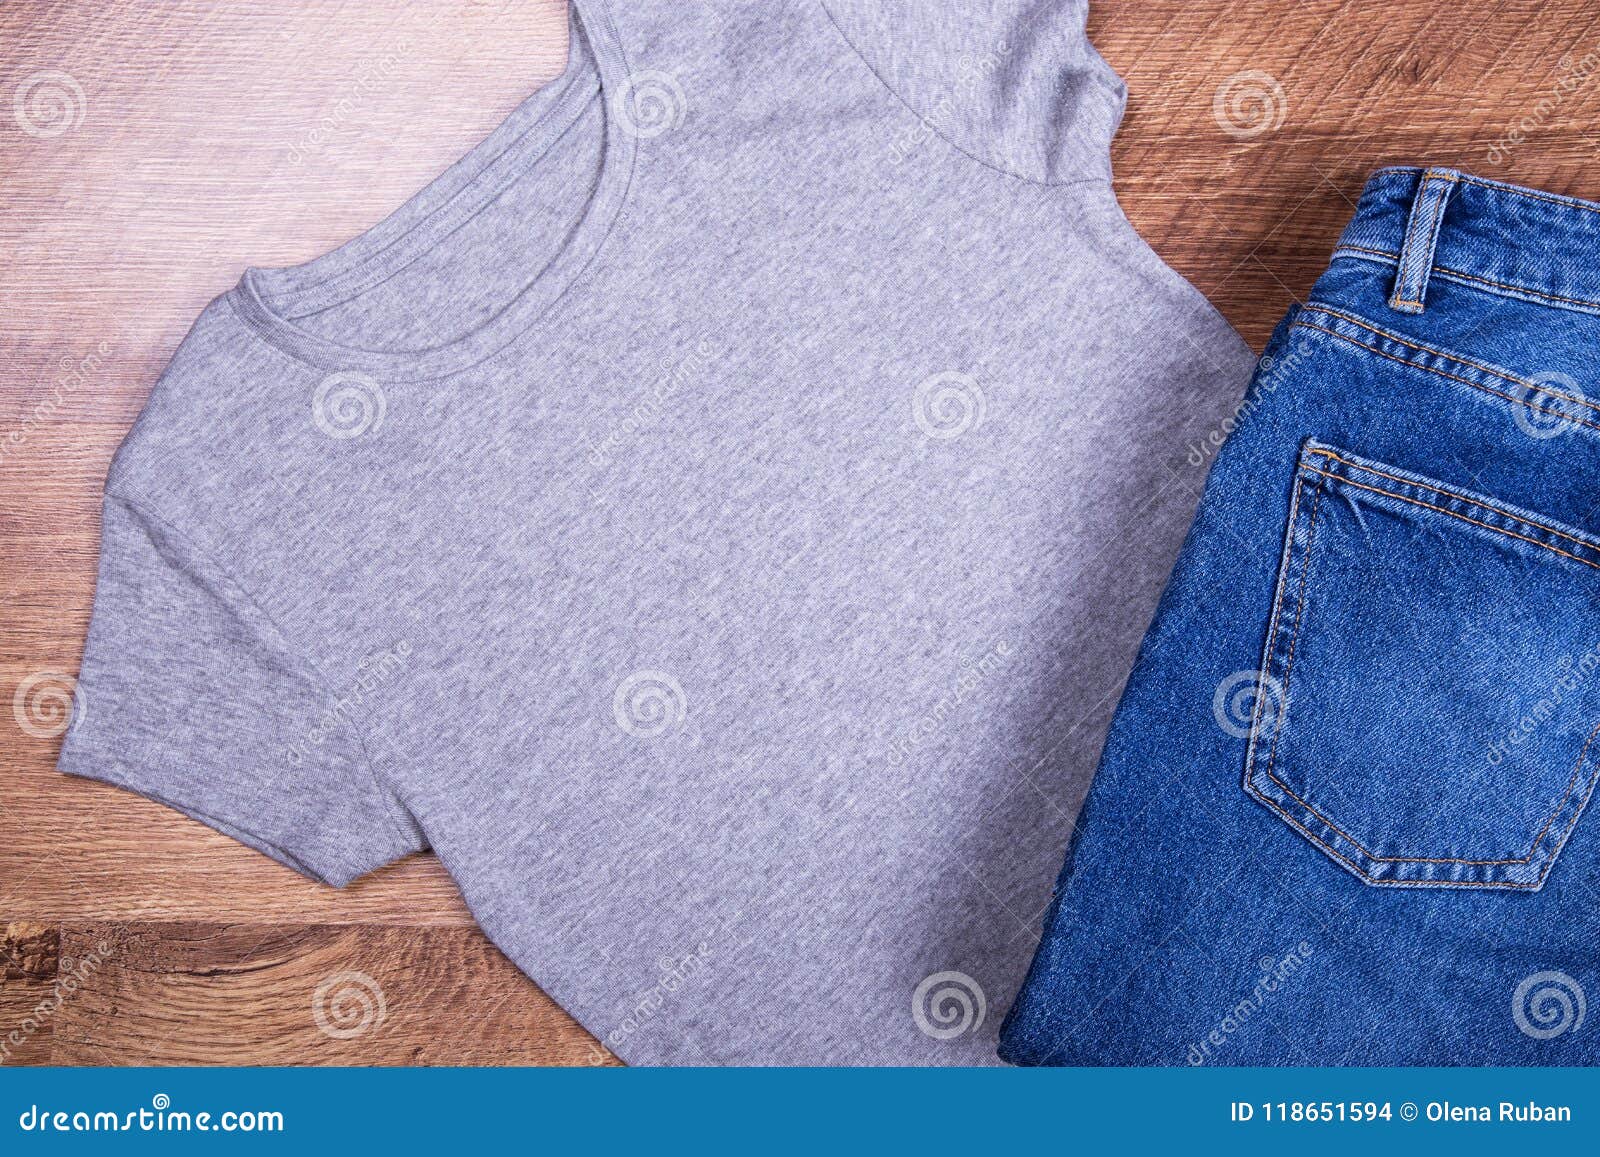 Jeans and gray T-shirt stock photo. Image of people - 118651594